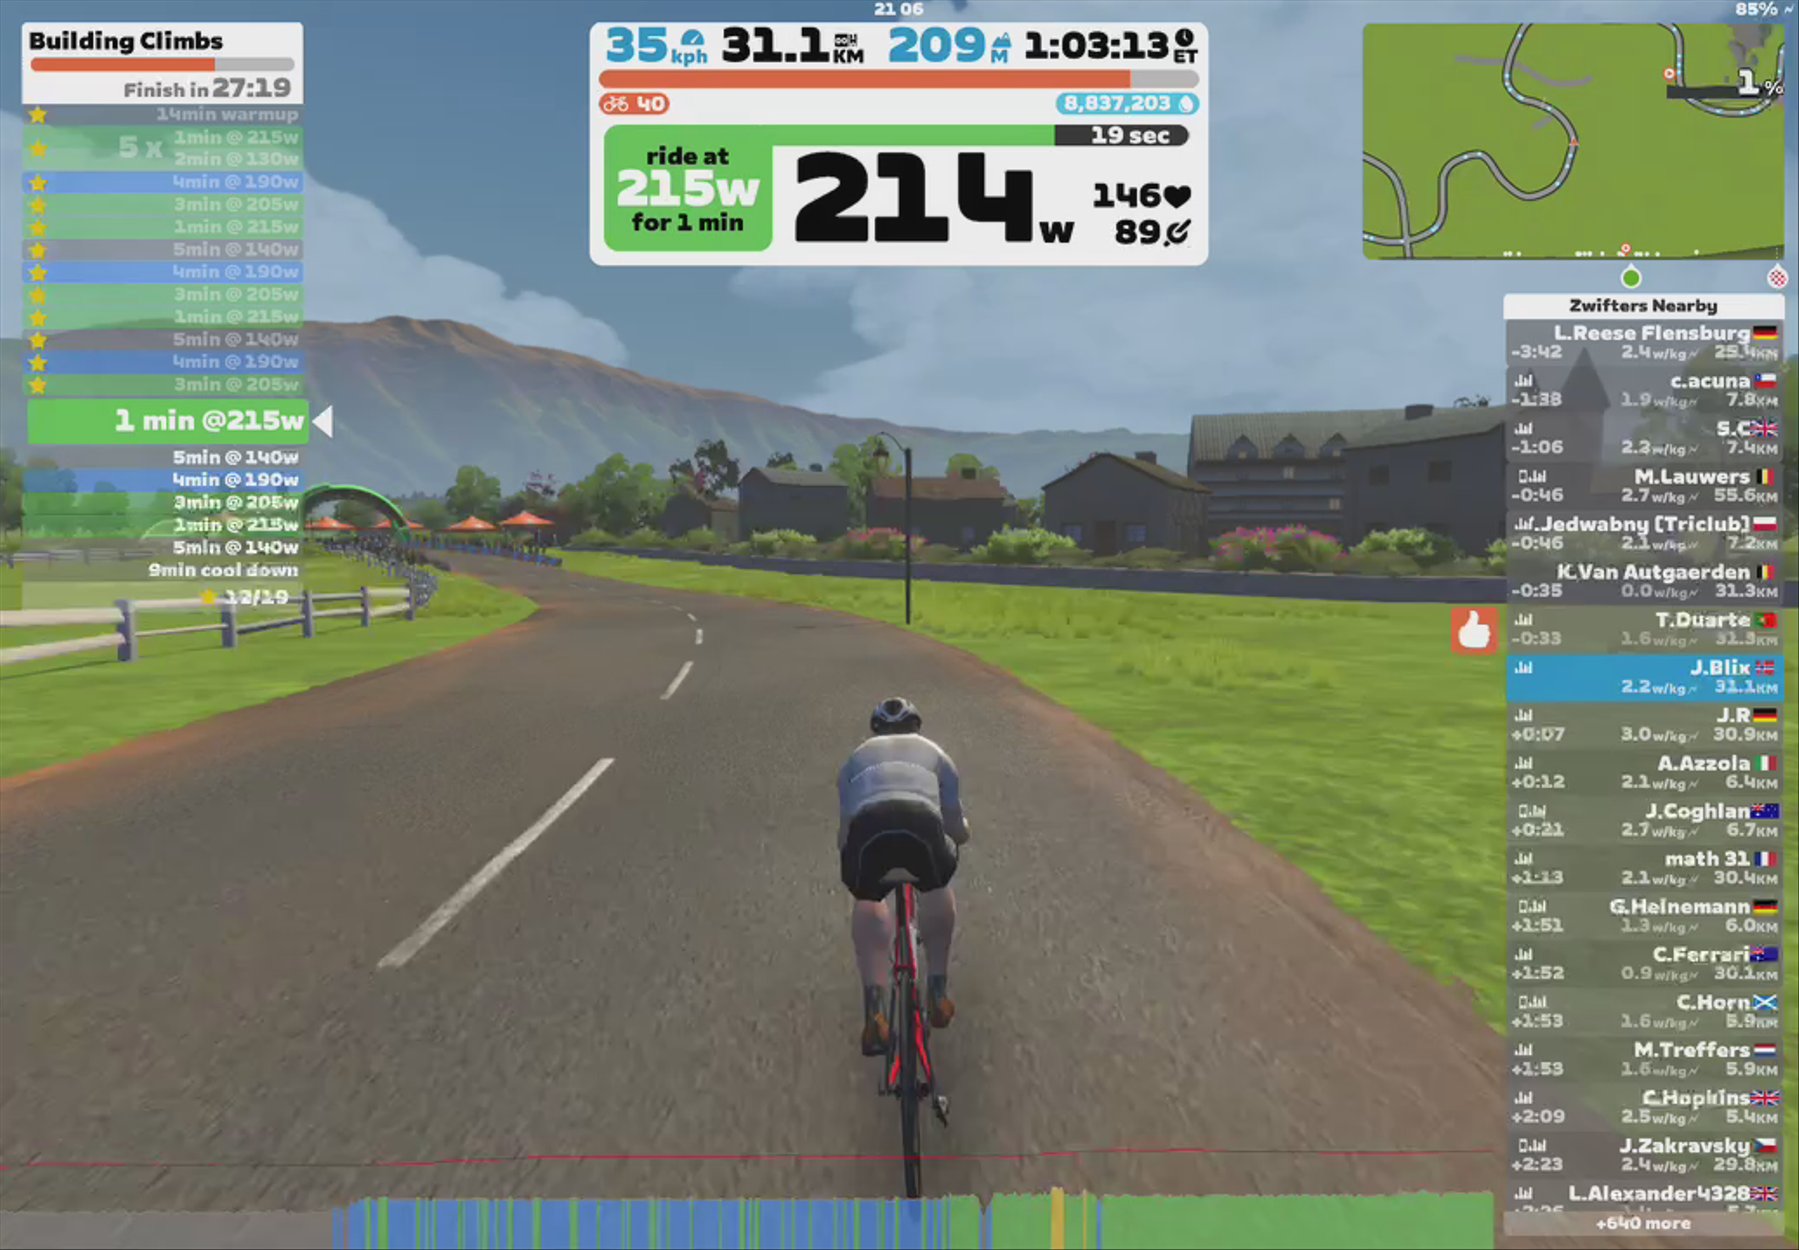 Zwift - Building Climbs in France